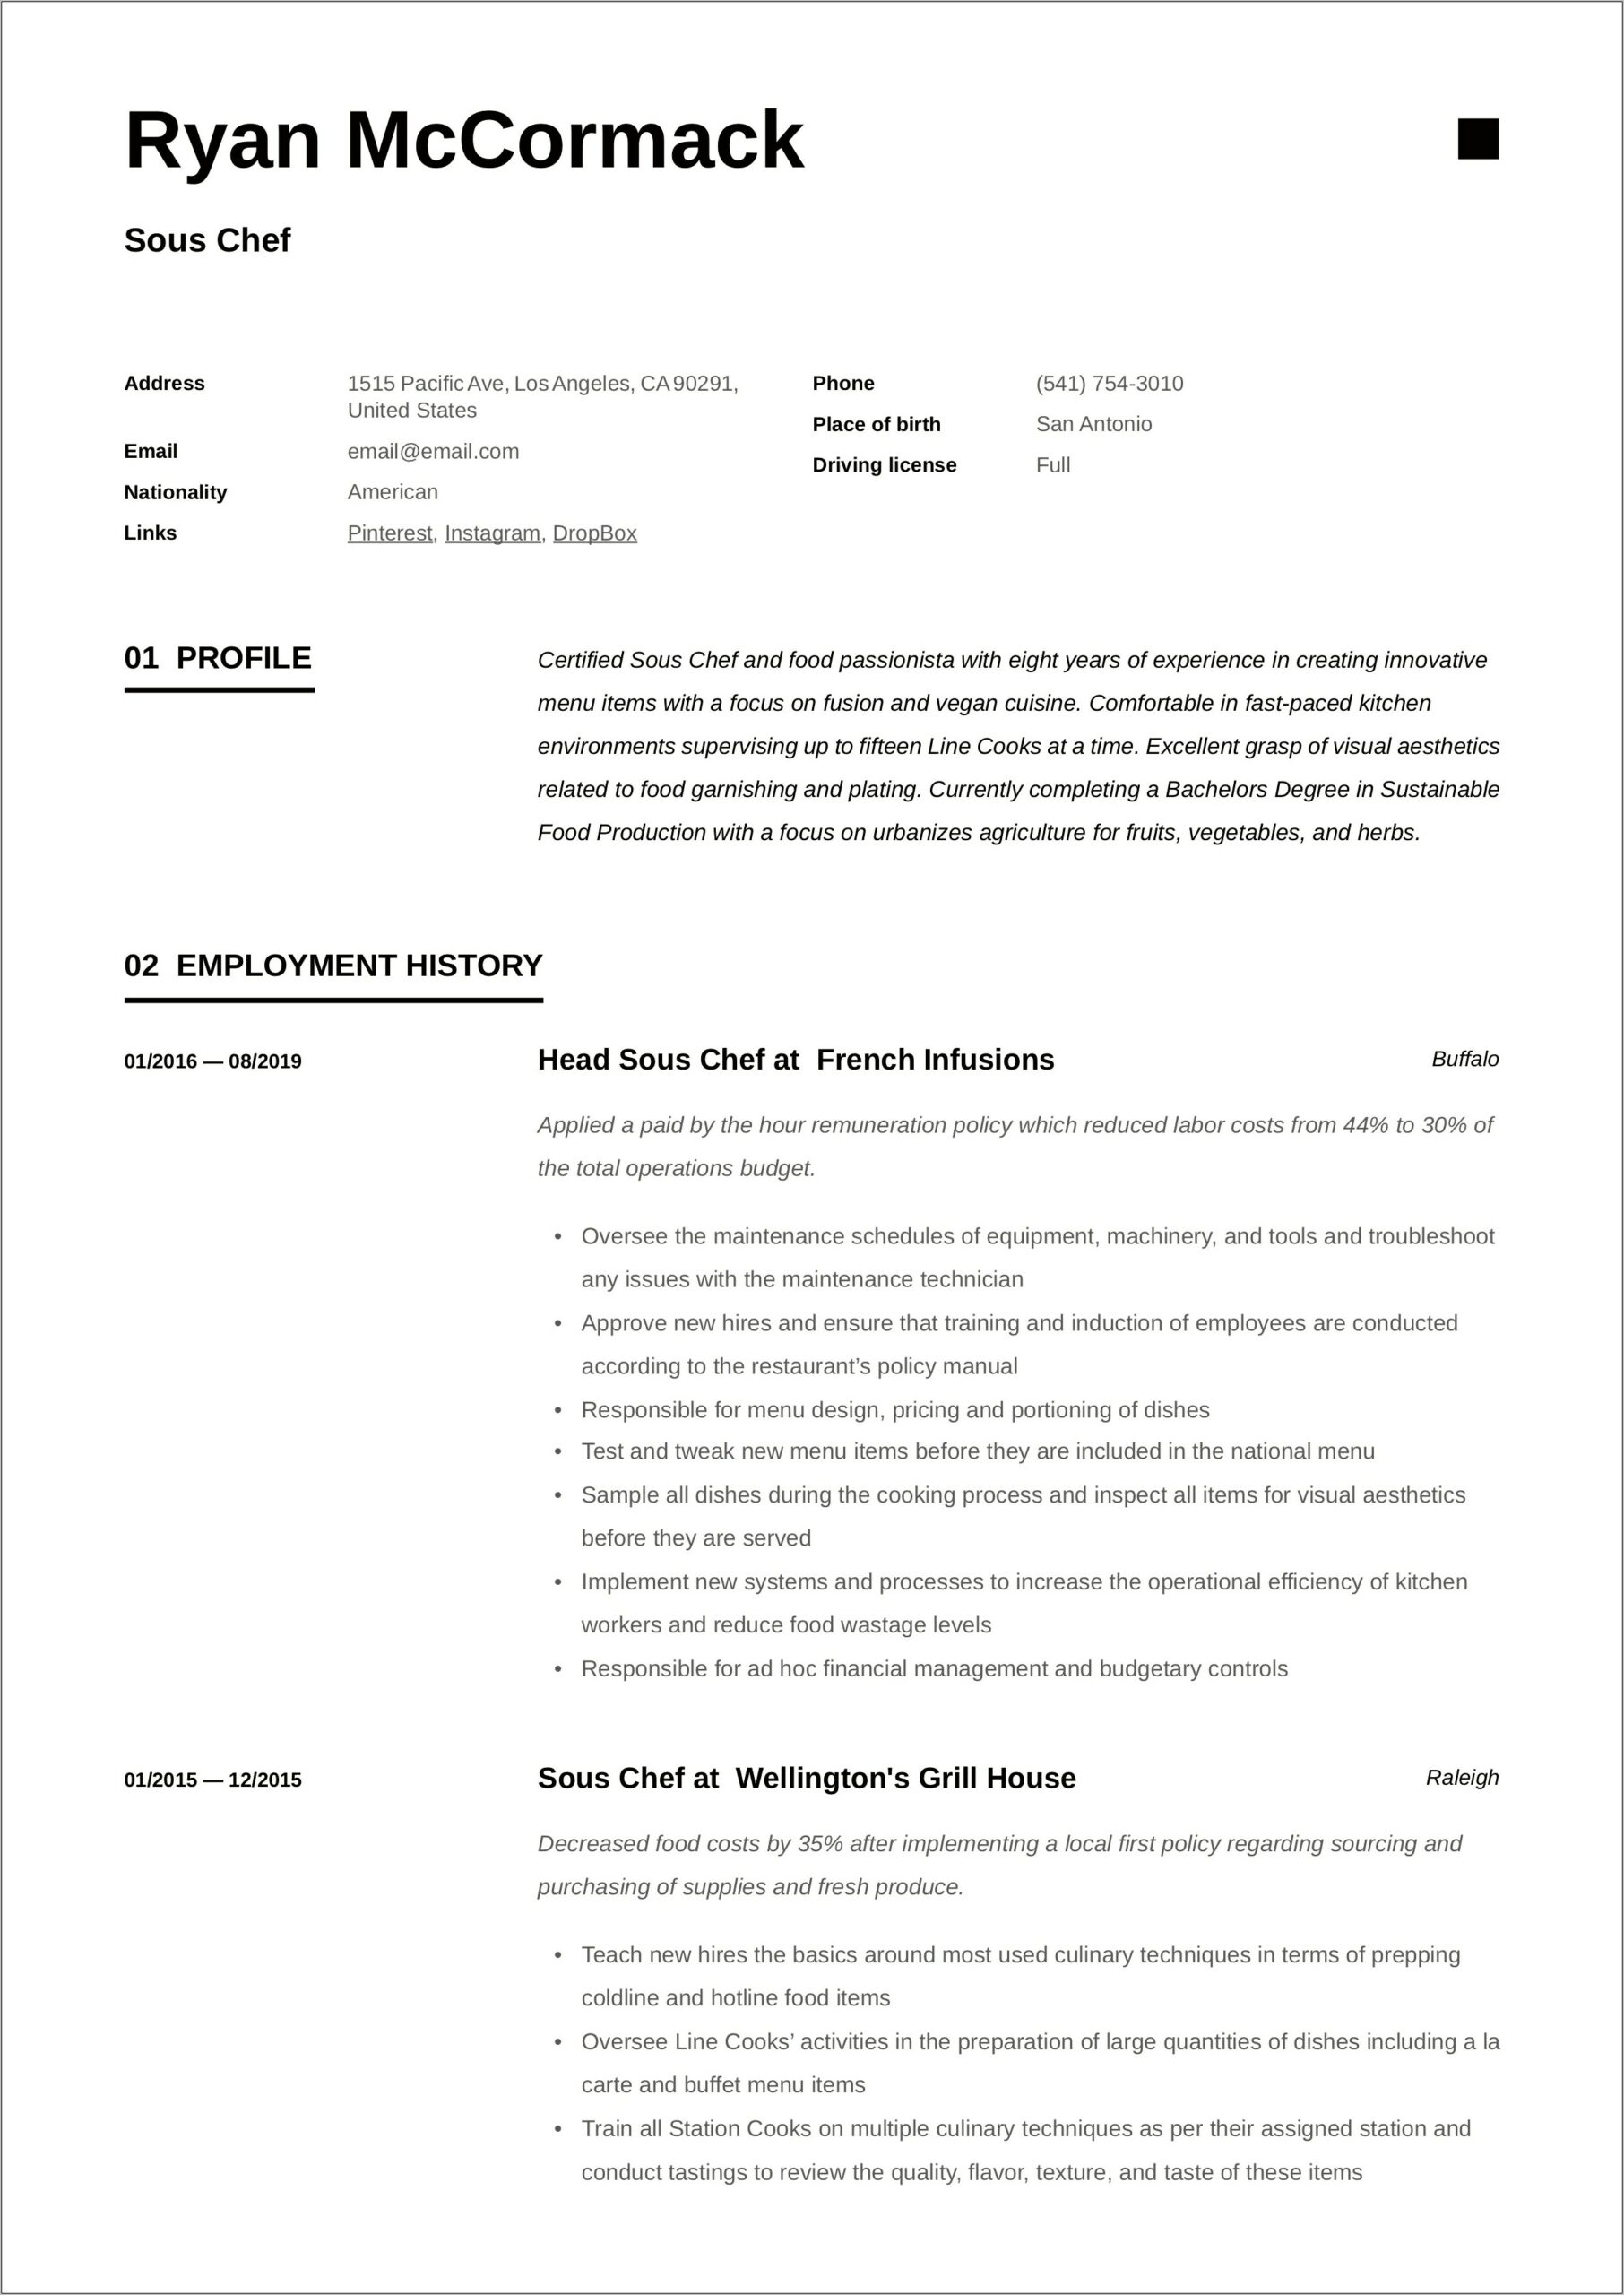 Sous Chef Chef Resume Sample